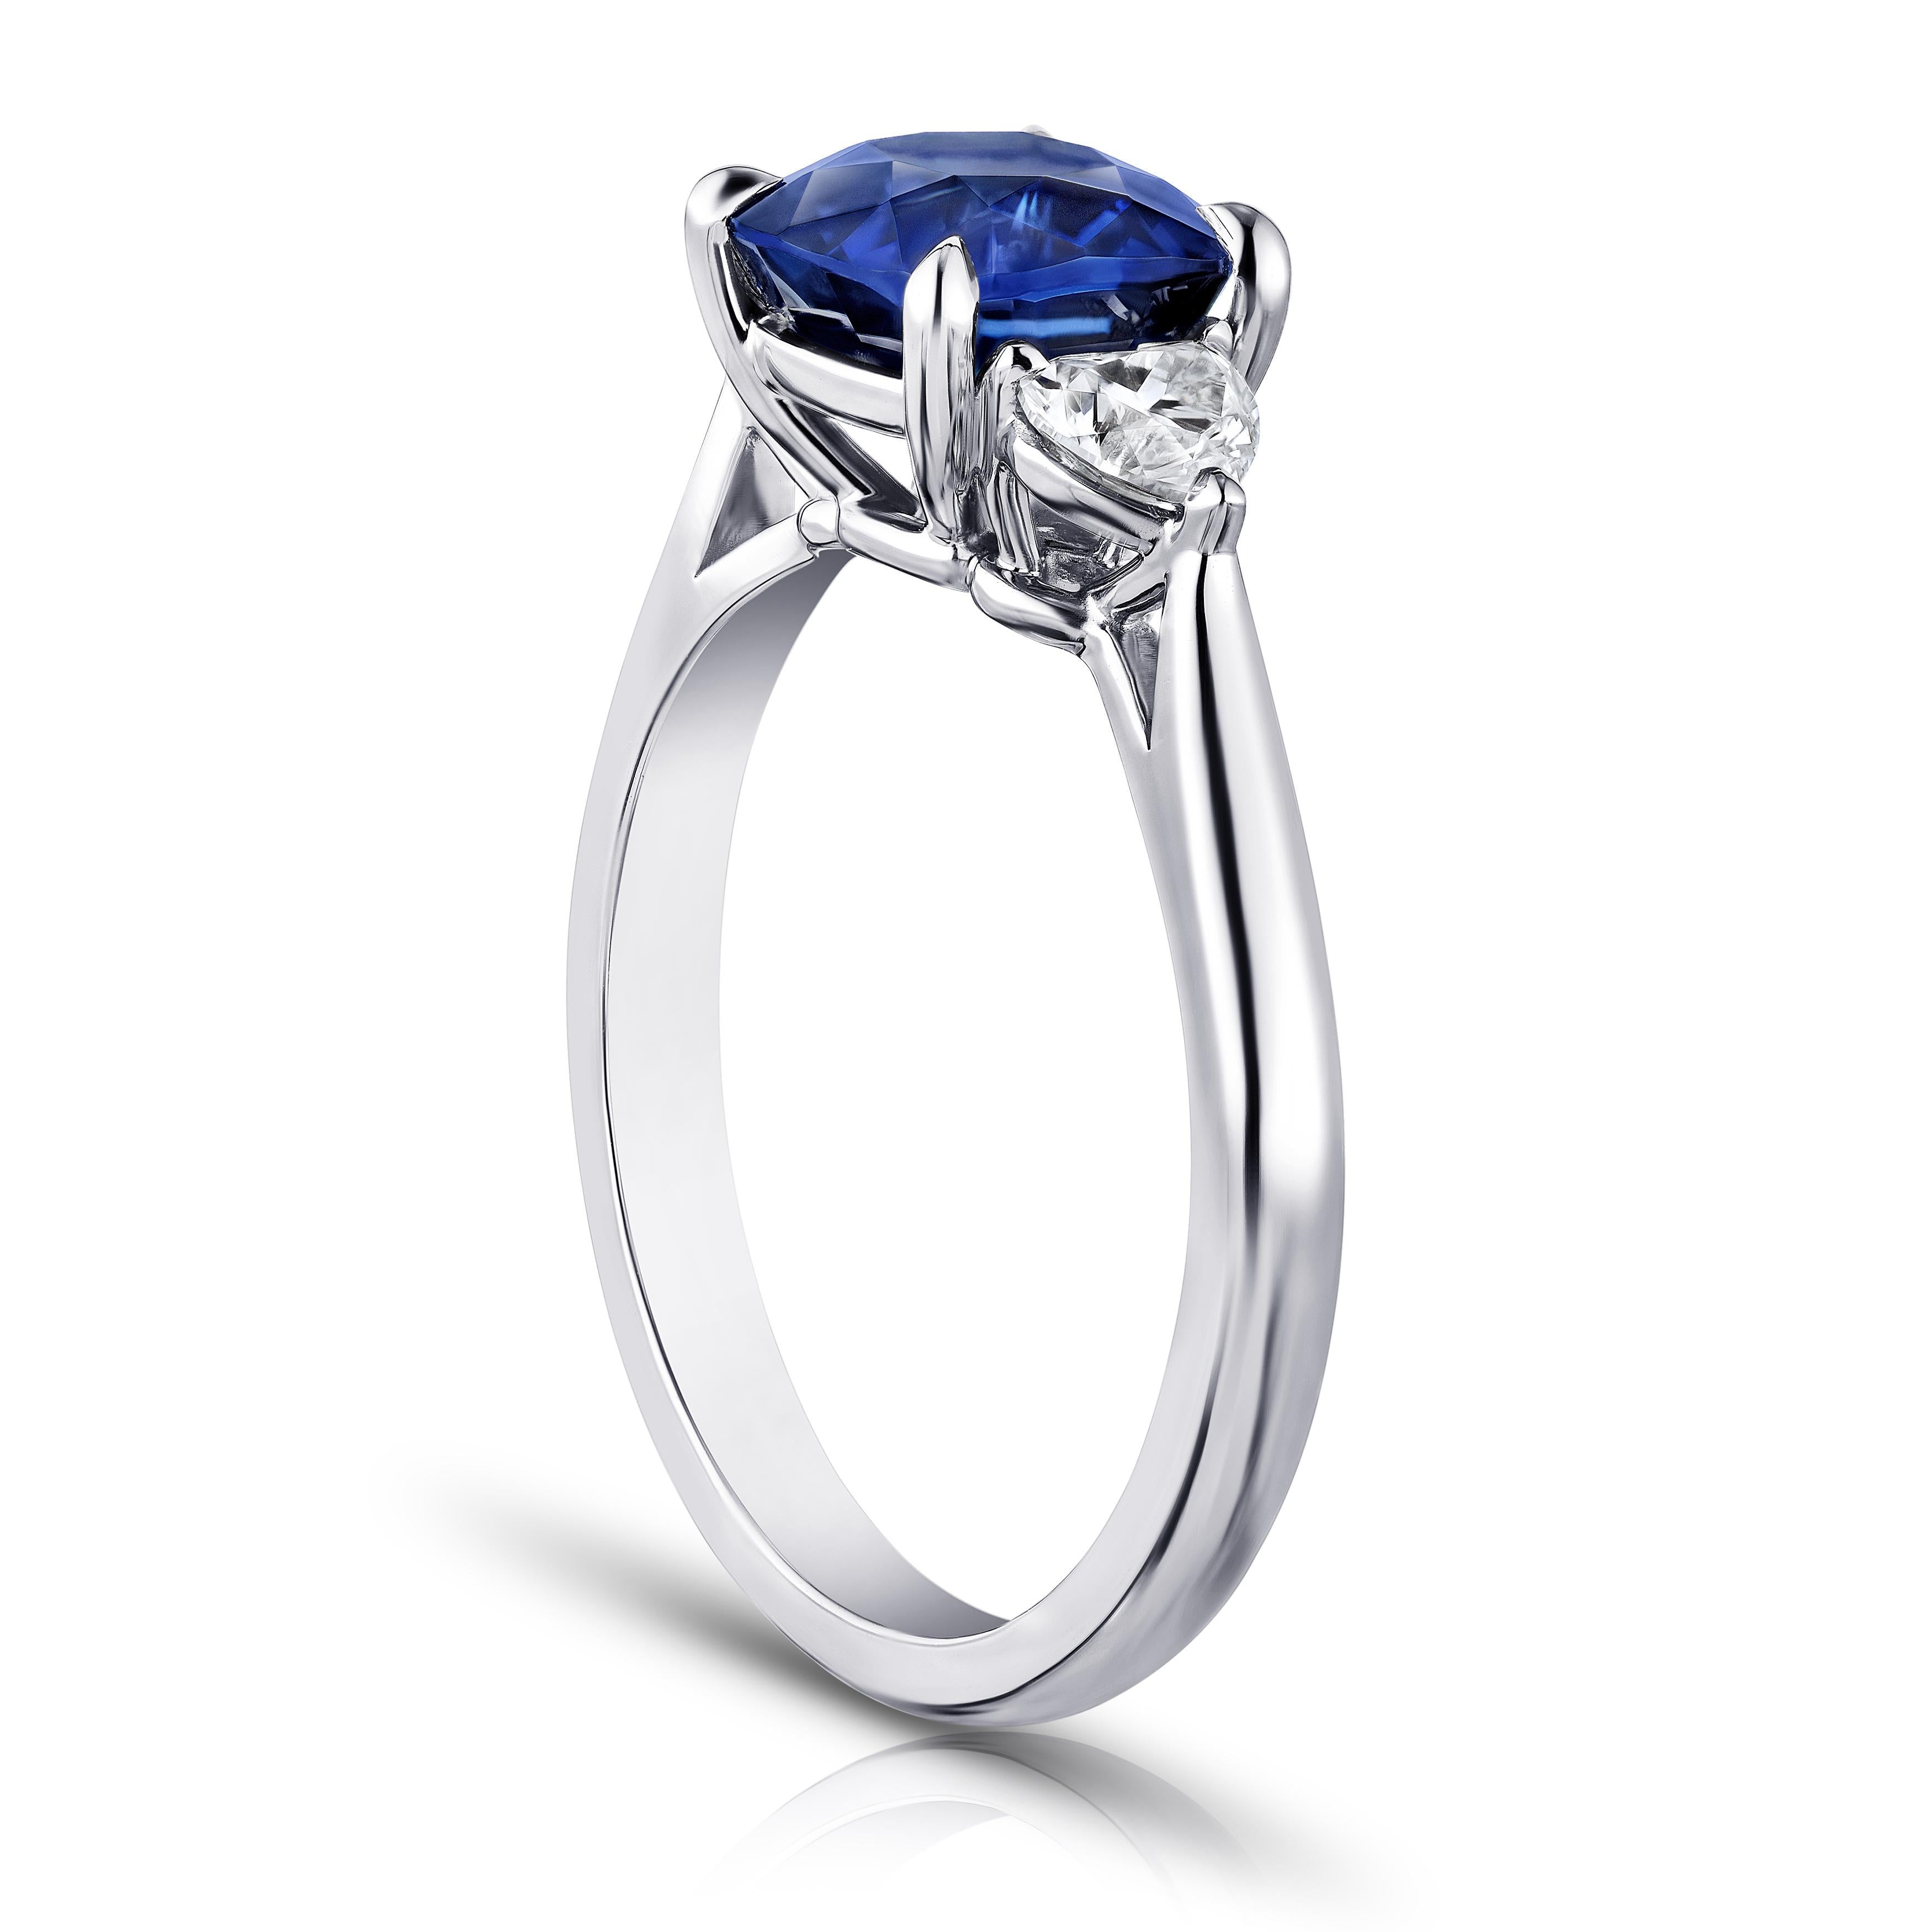 2.61 carat cushion blue sapphire with heart shape diamonds .49 carats set in a platinum ring. Ring is currently a size 7. We offer free resizing to your finger size. 
